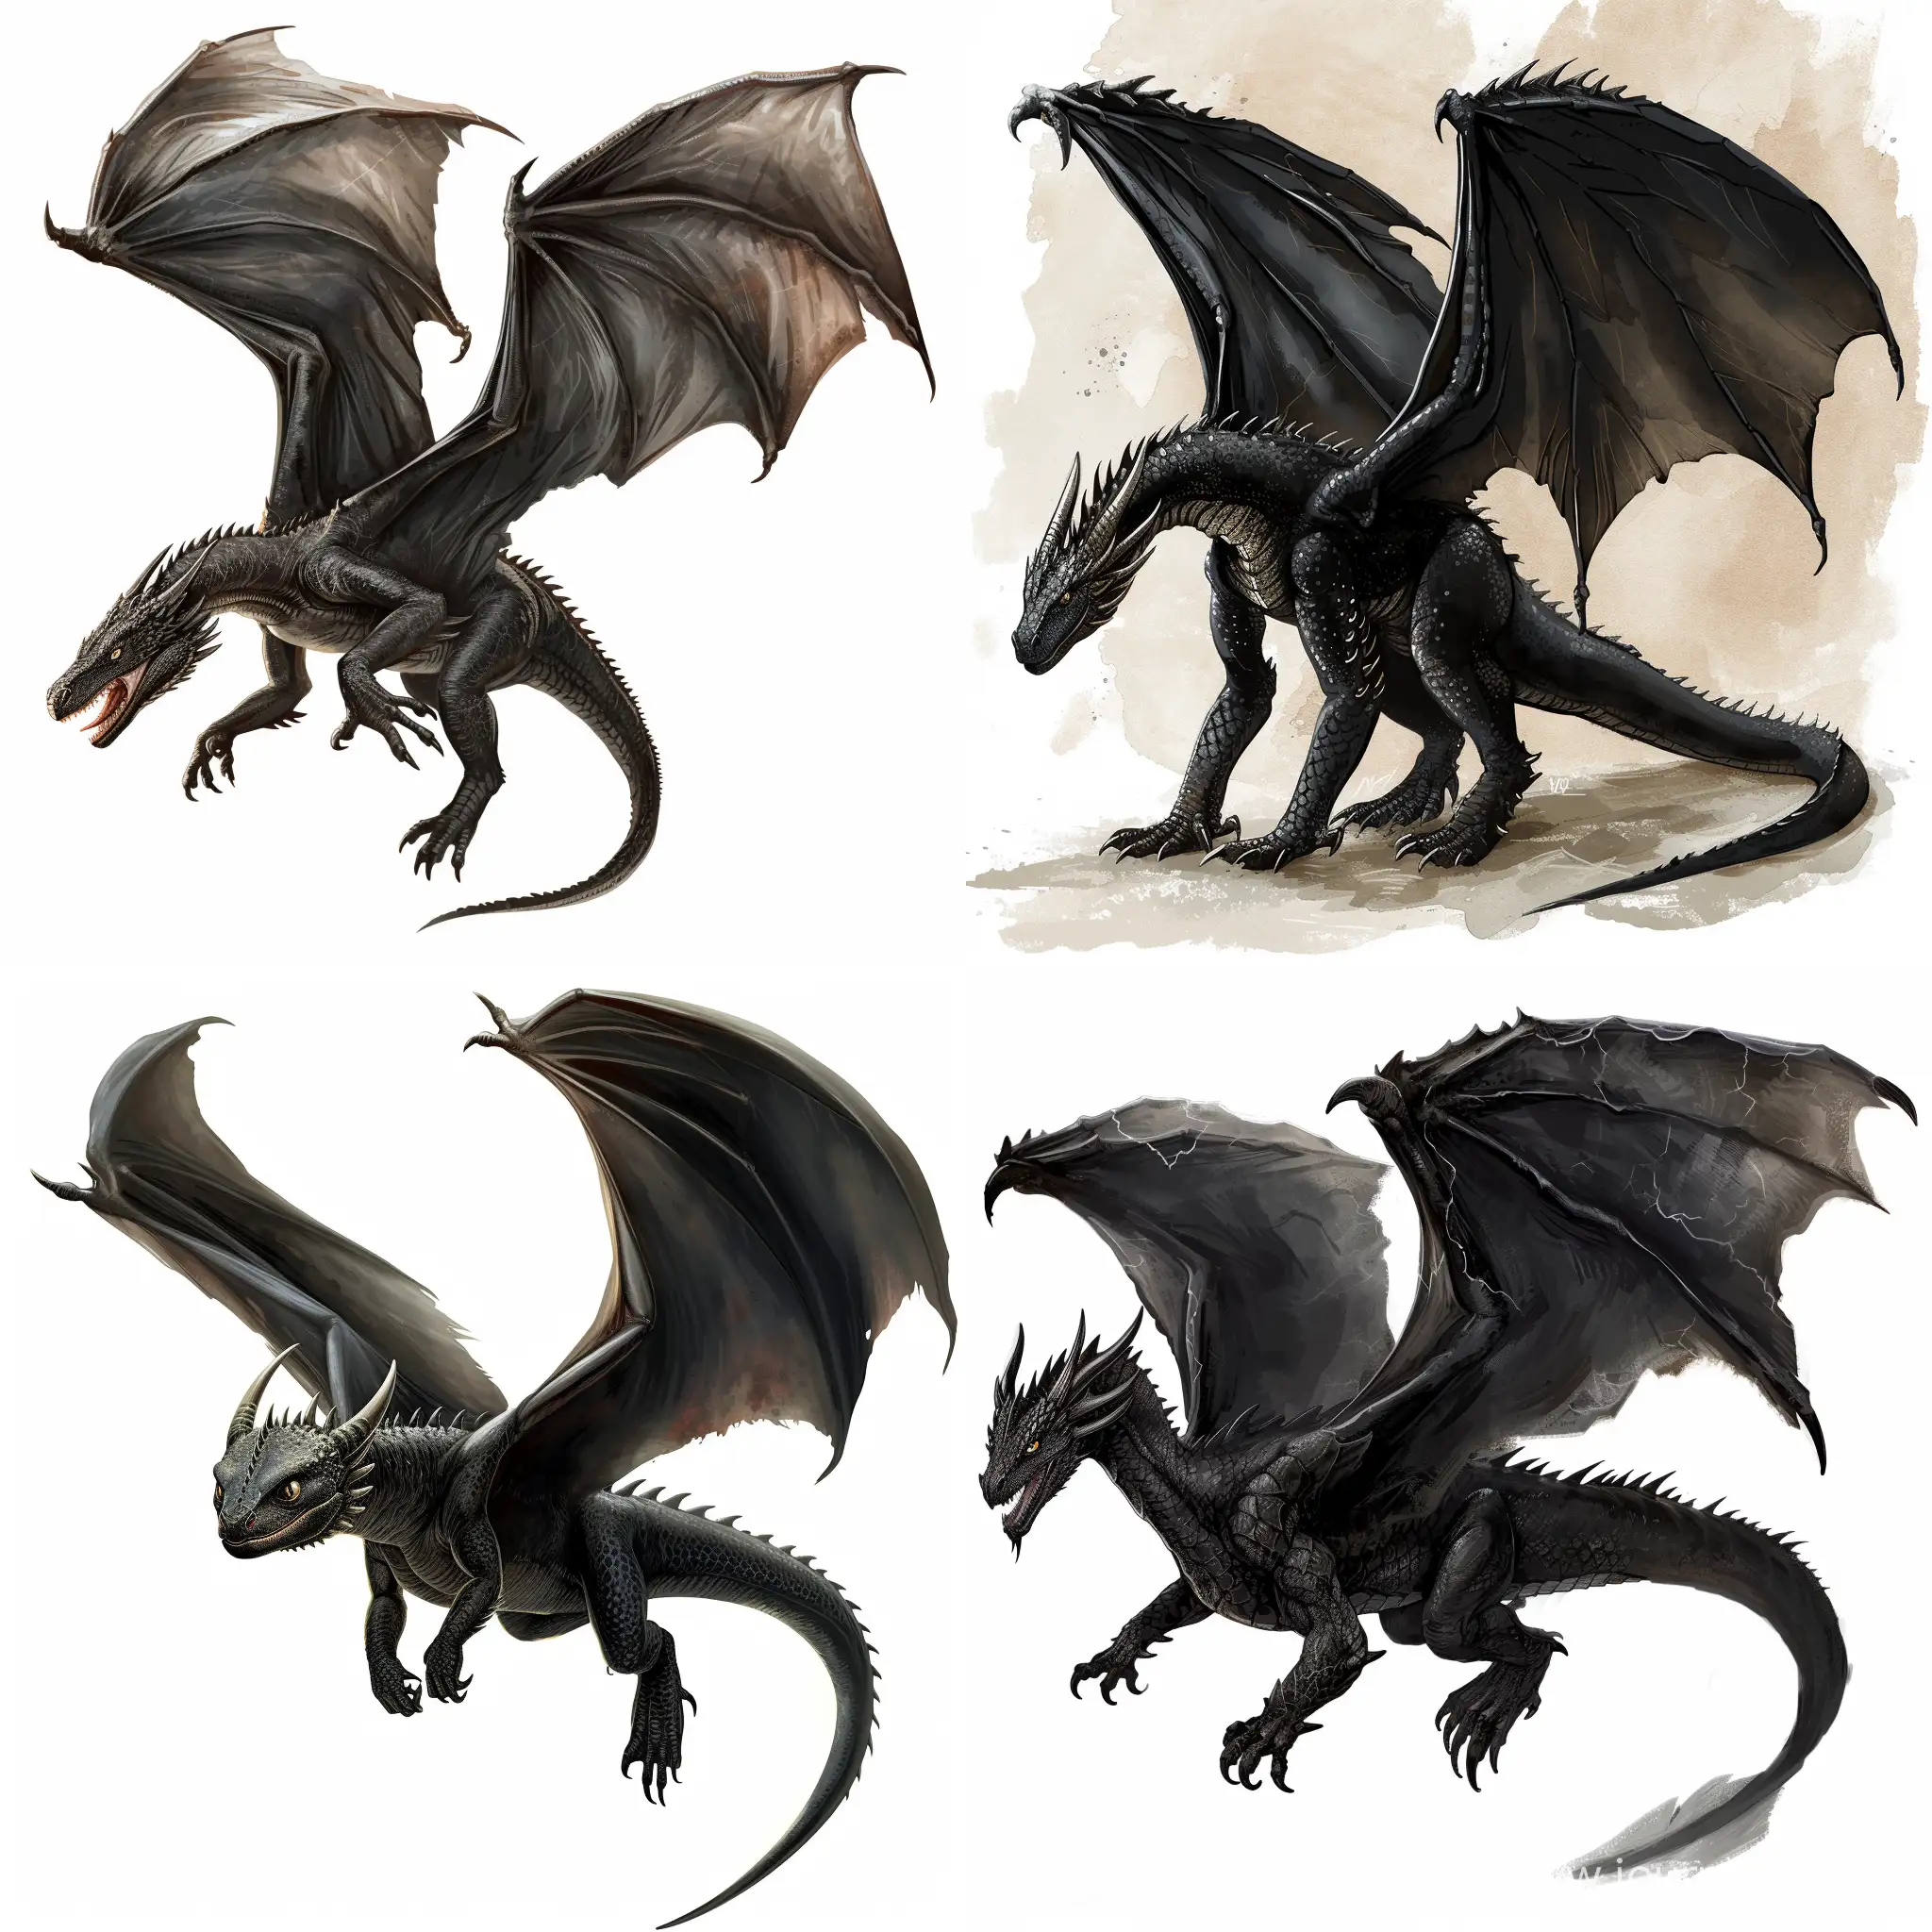 A full image of a Black flying dragon